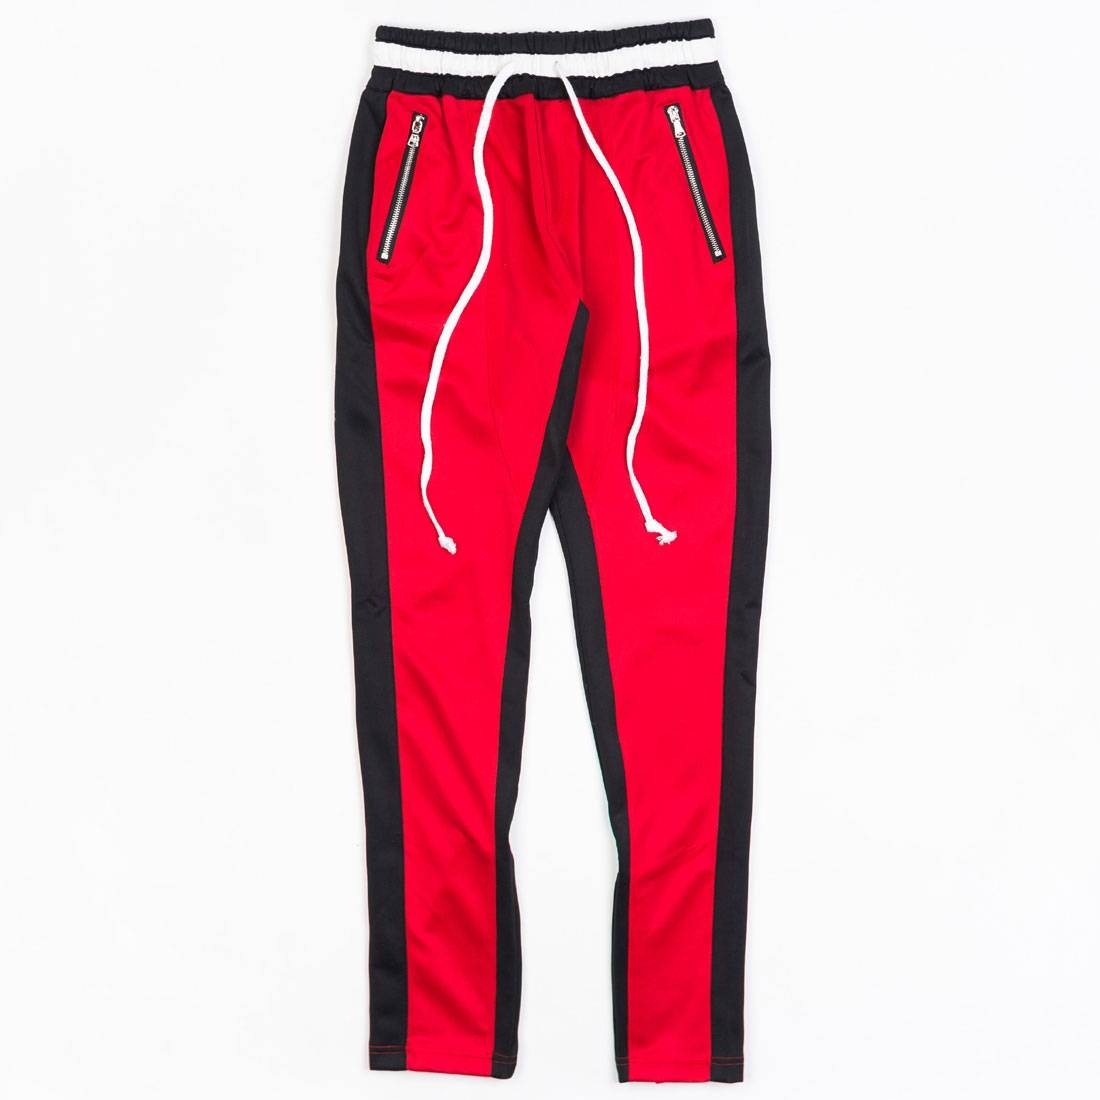 Lifted Anchors Men Jenner Track Pants - BAIT Exclusive (red / black)